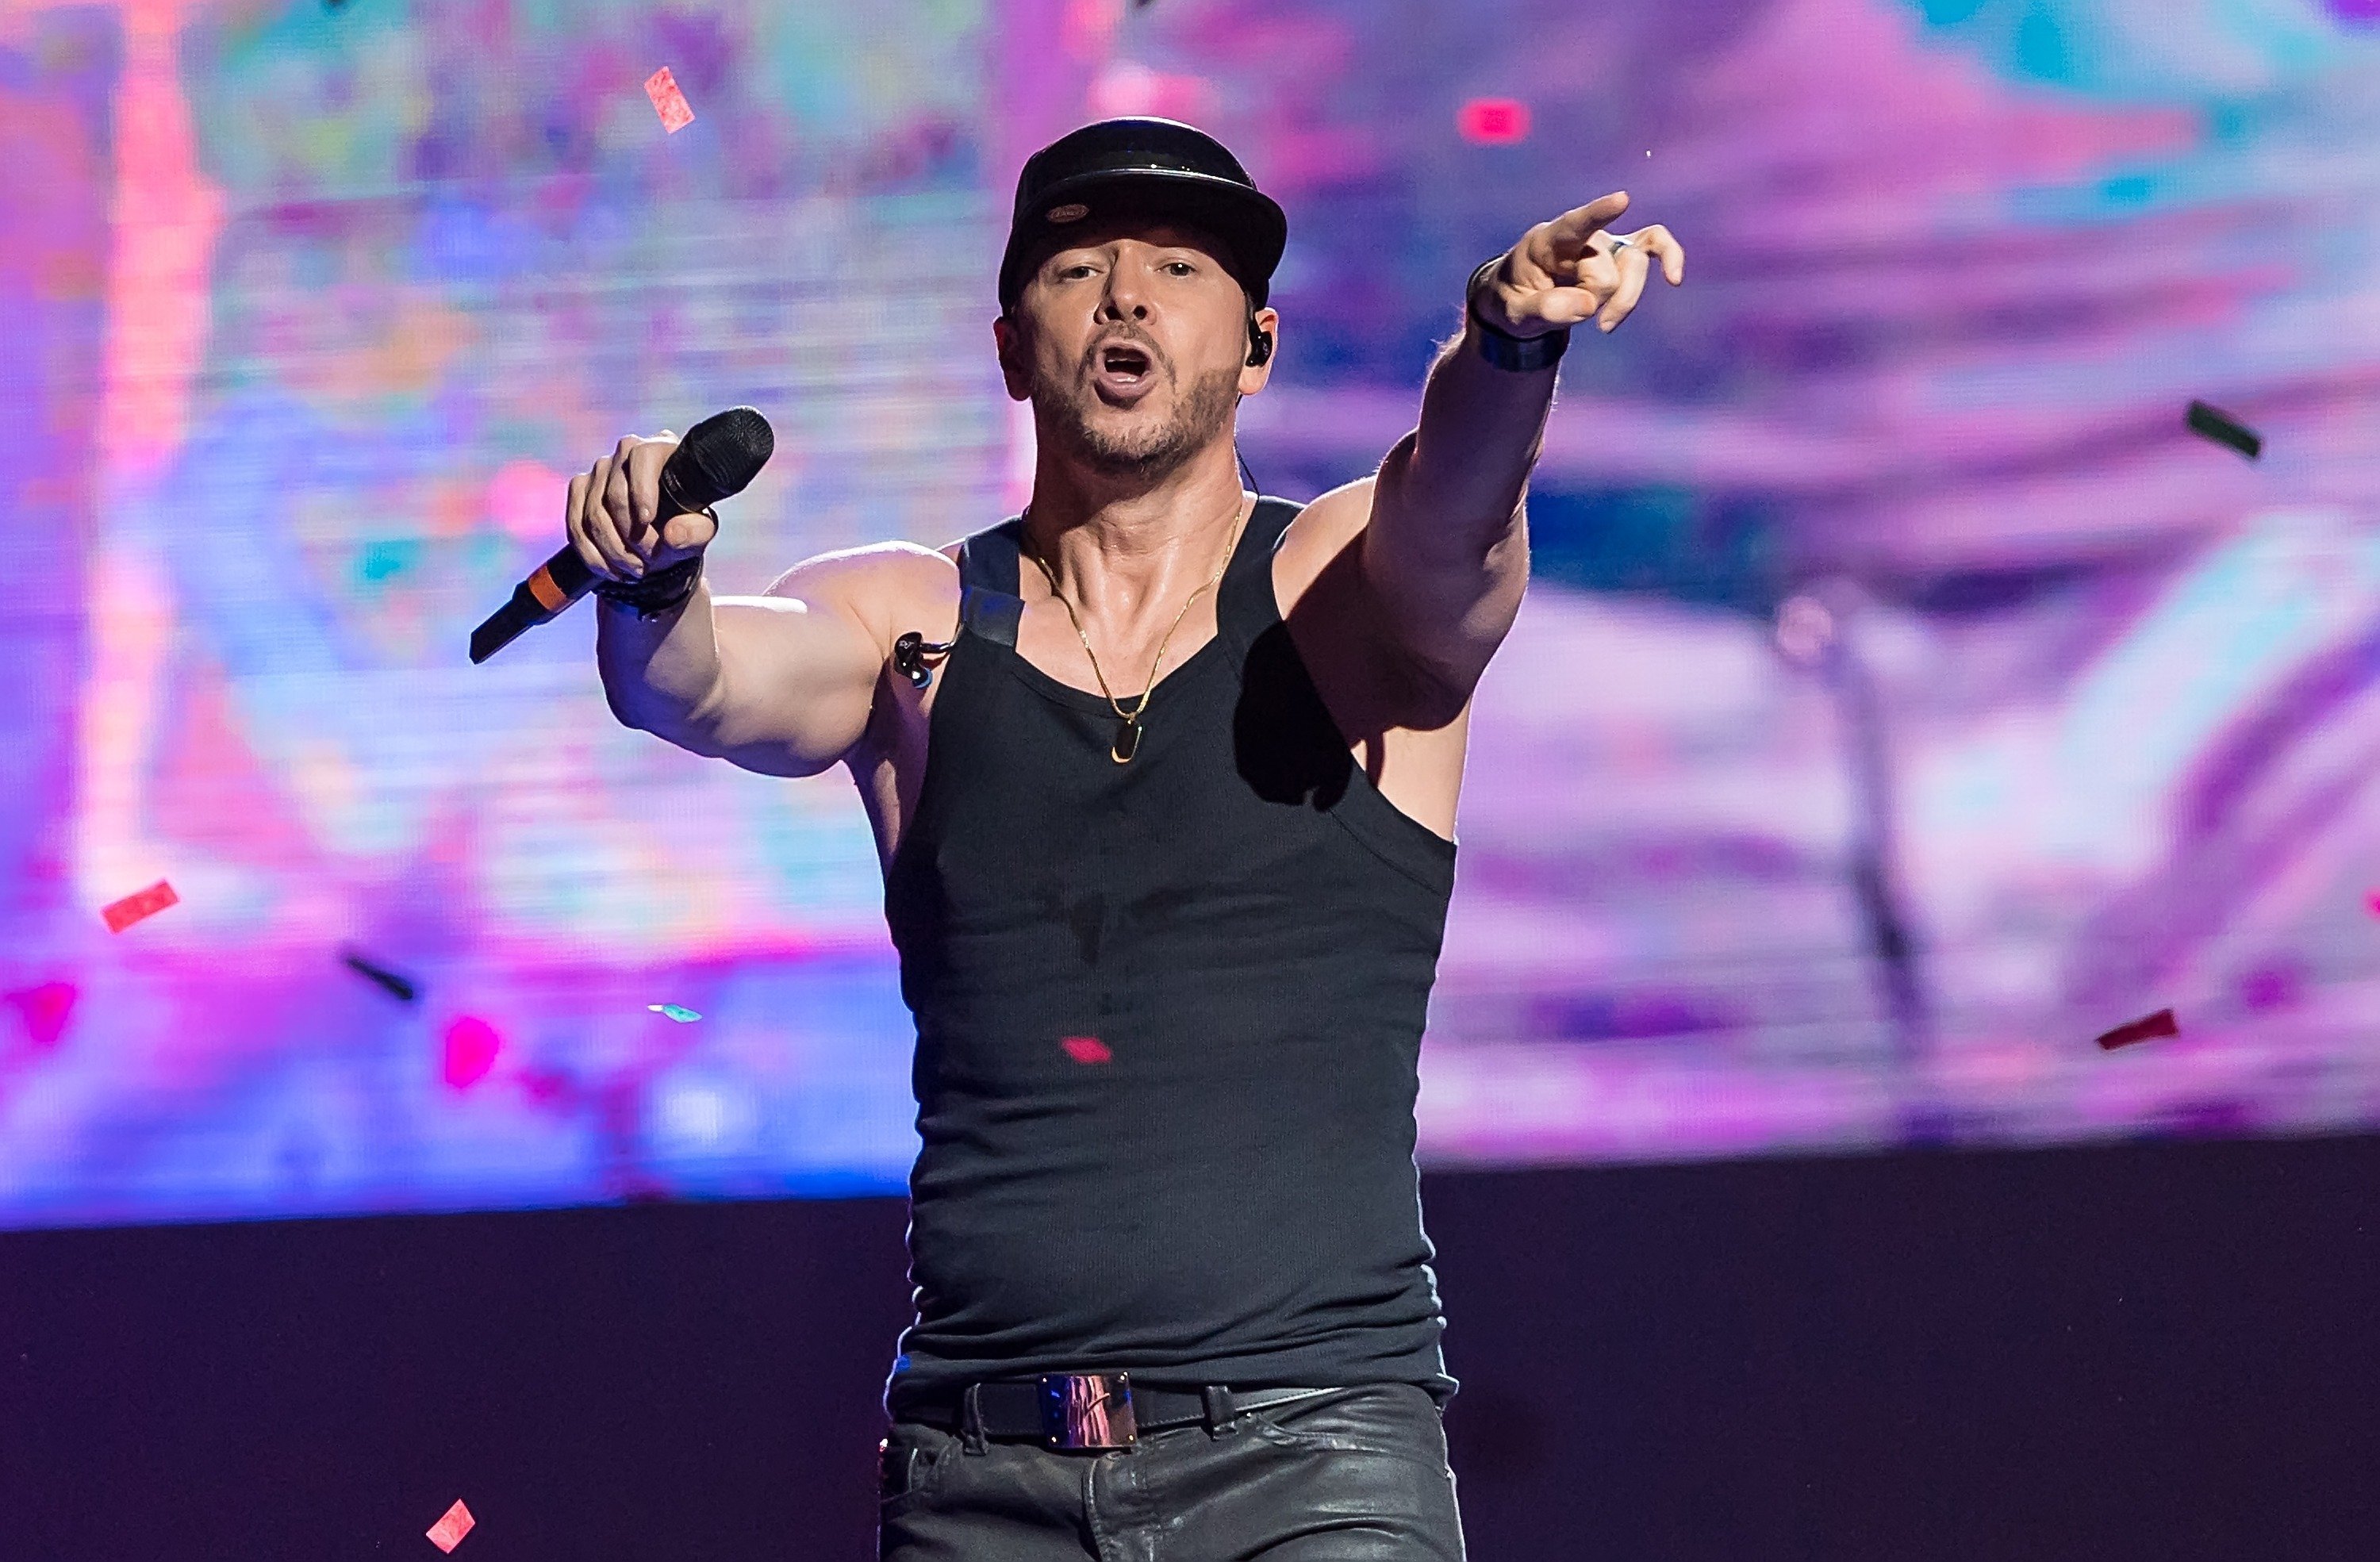 Donnie Wahlberg performs with New Kids on the Block during "The Total Package" tour in Philadelphia, Pennsylvania on June 24, 2017 | Photo: Getty Images